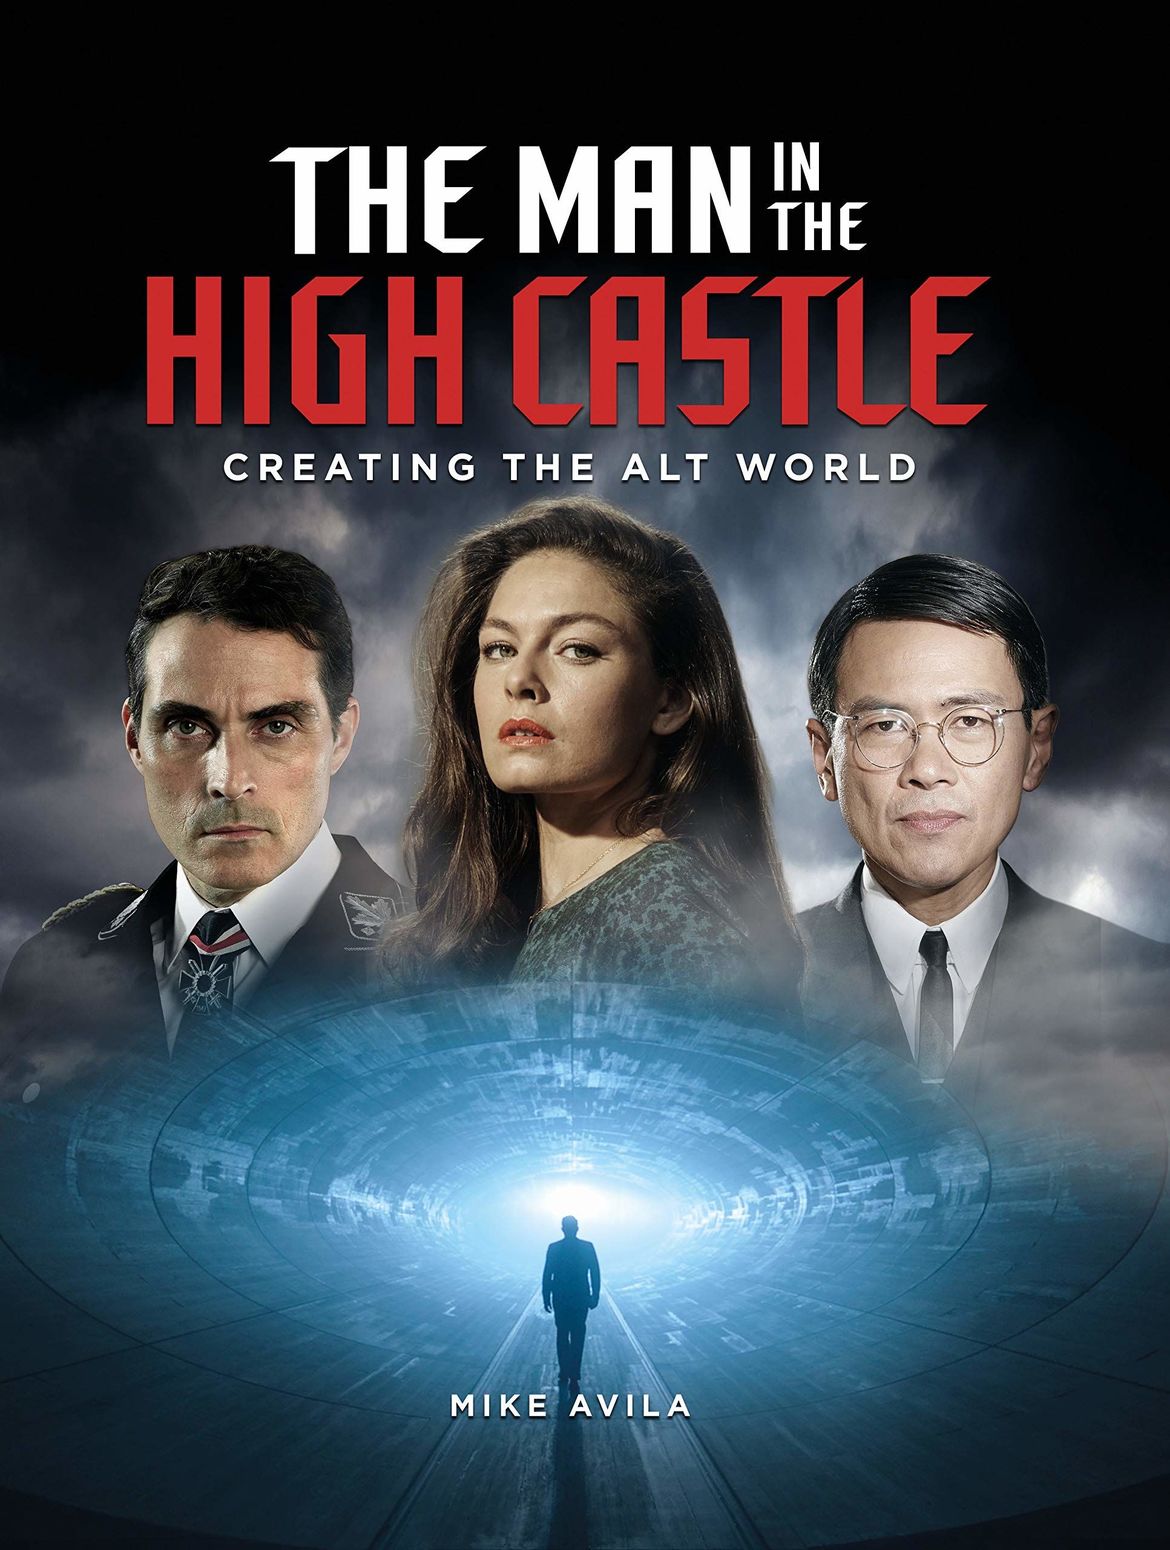 book review man in the high castle